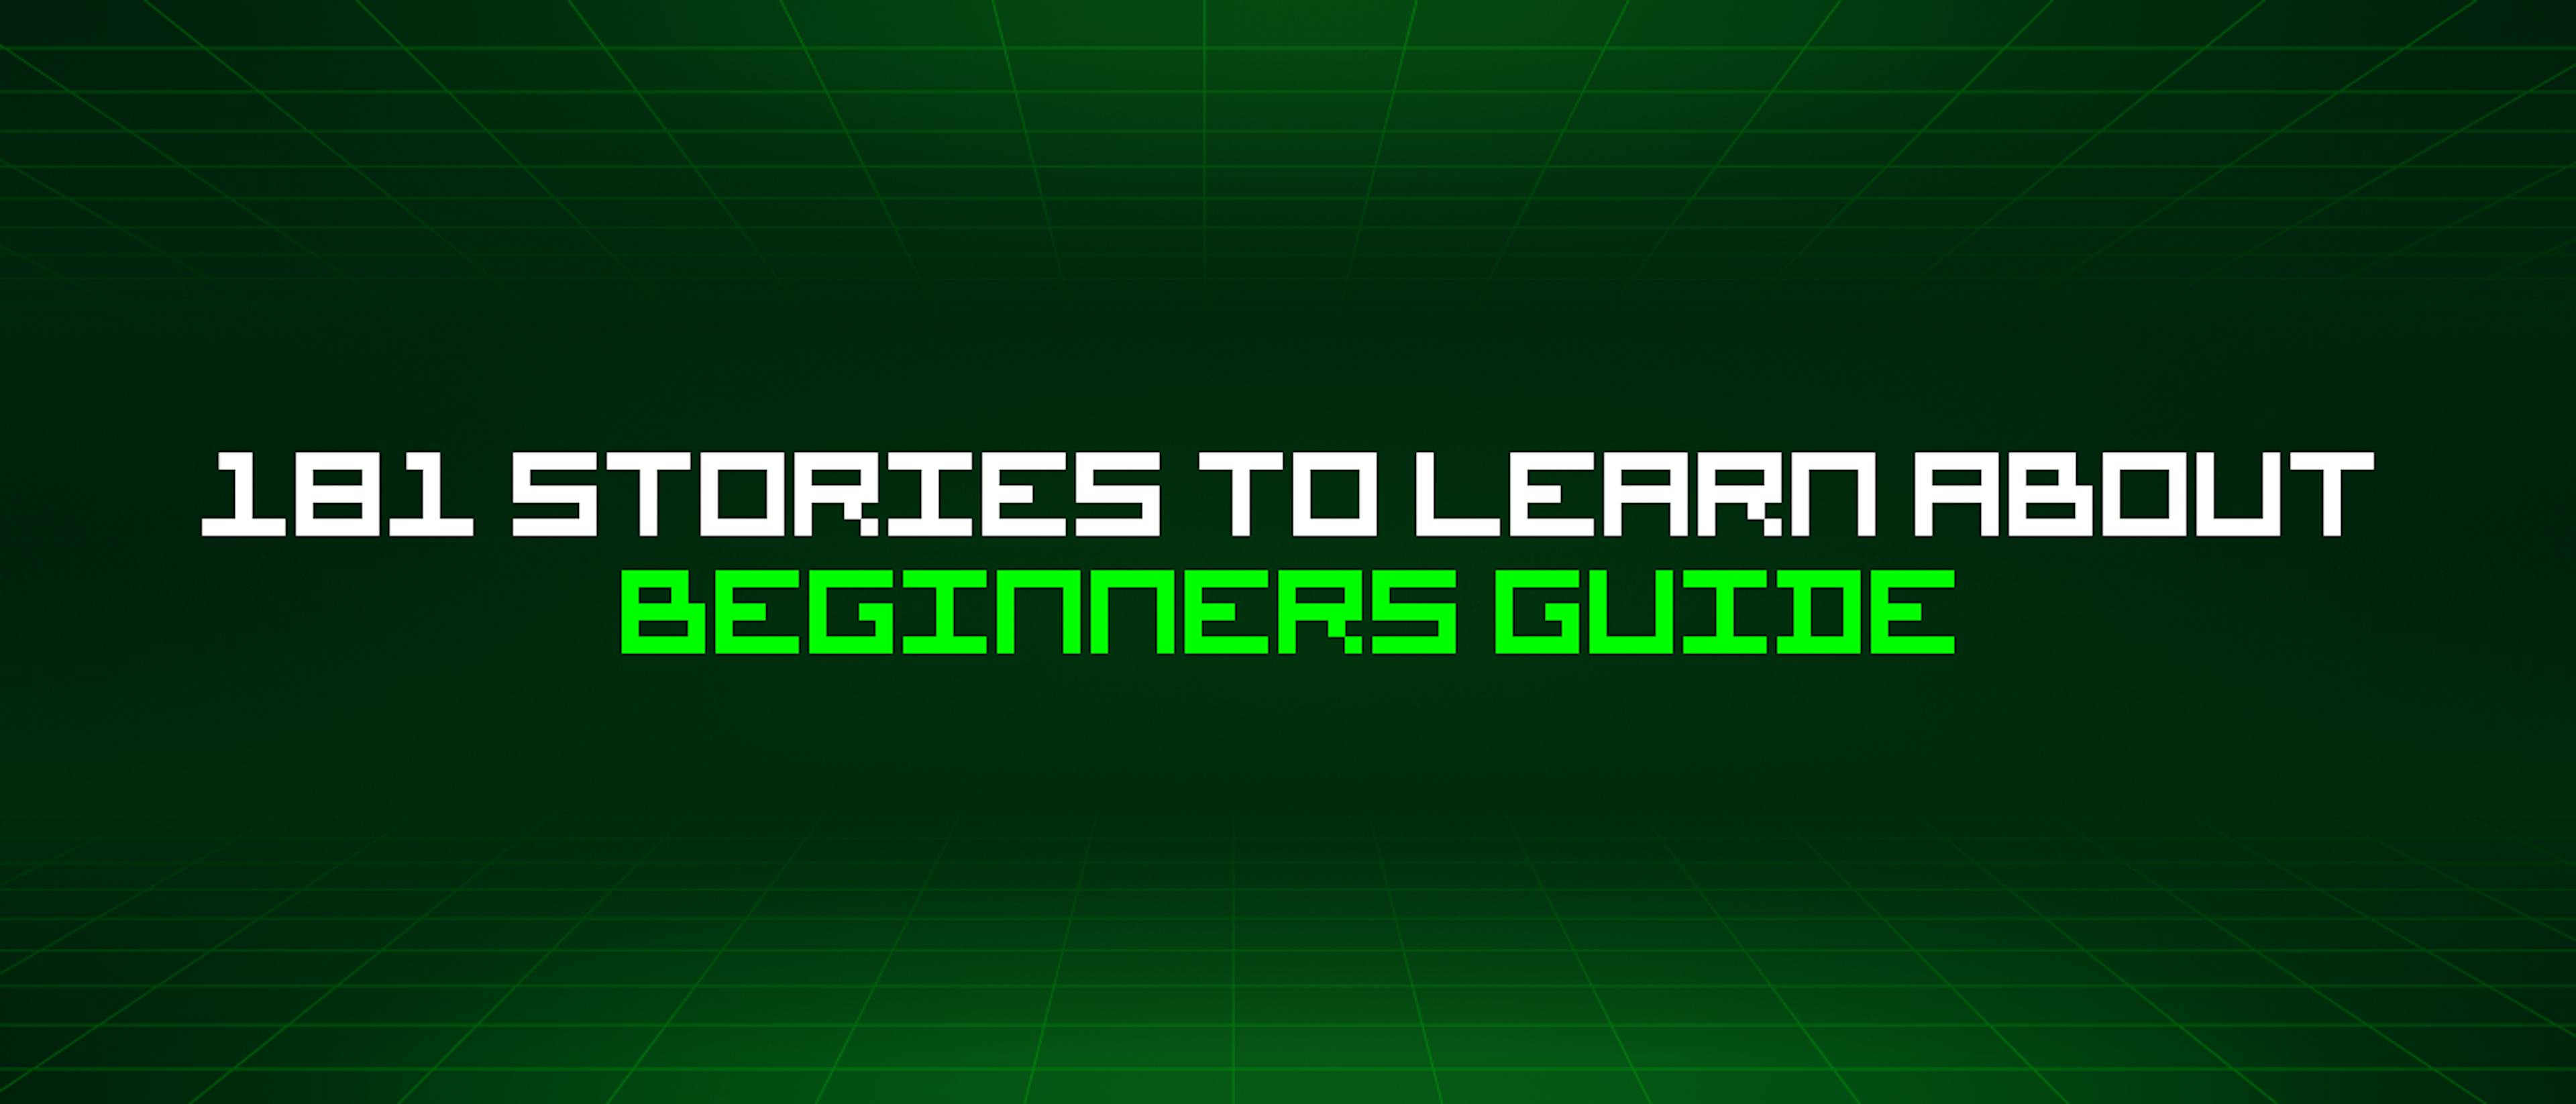 featured image - 181 Stories To Learn About Beginners Guide